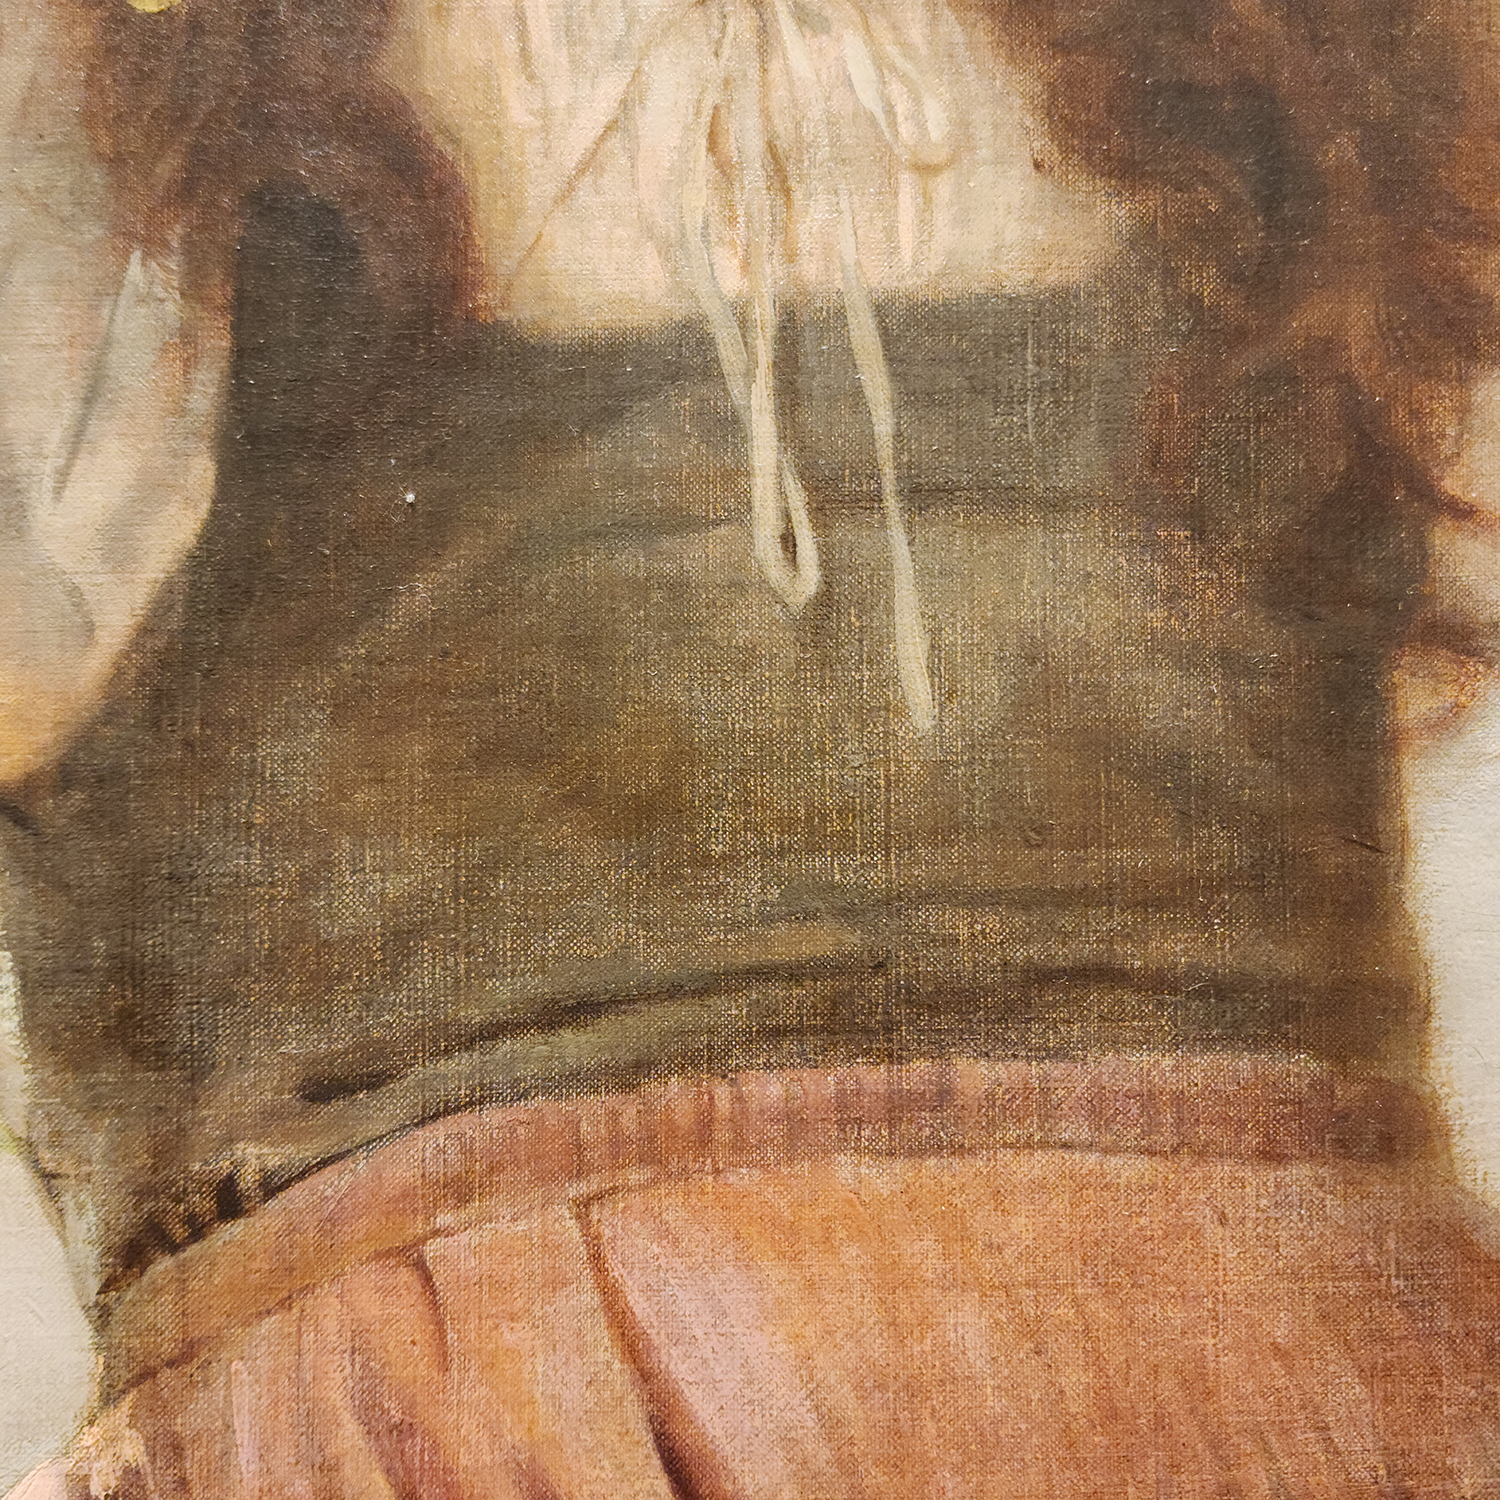 detail of the girl's clothing in the Perrault painting